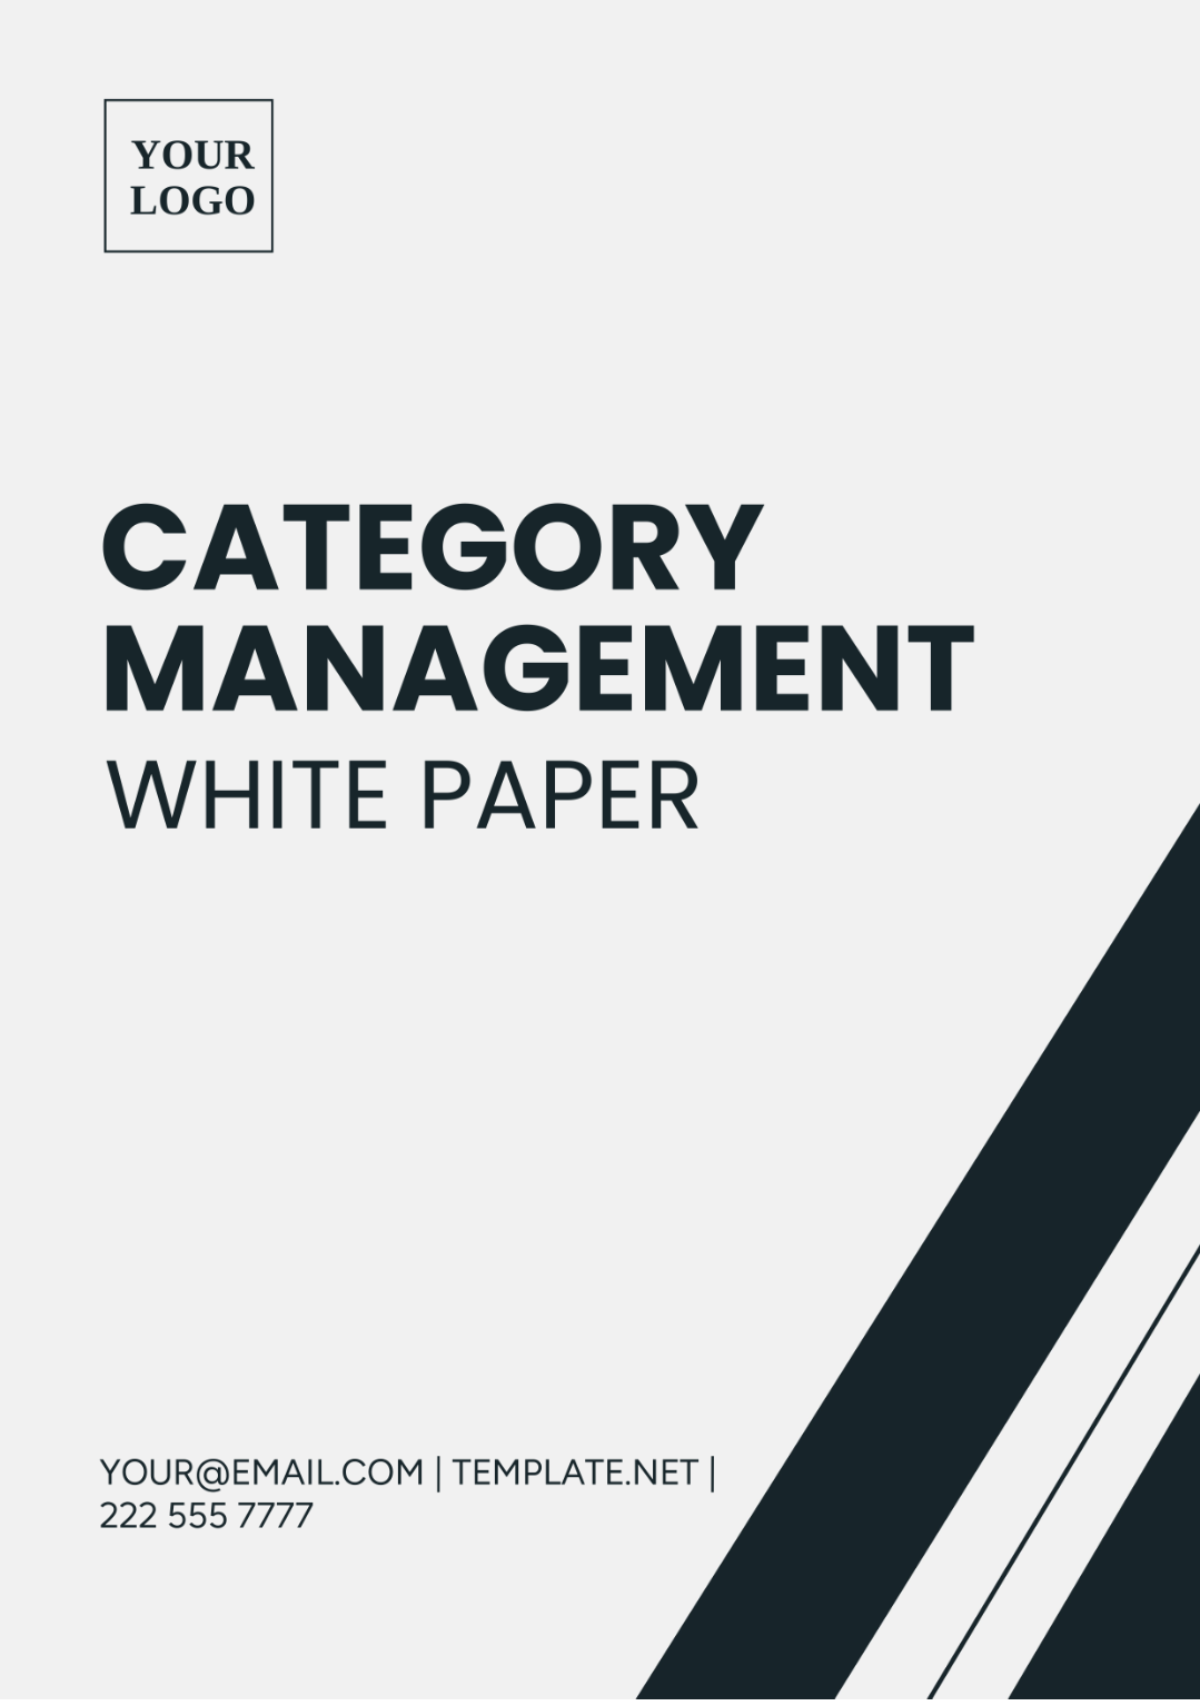 Category Management White Paper Template